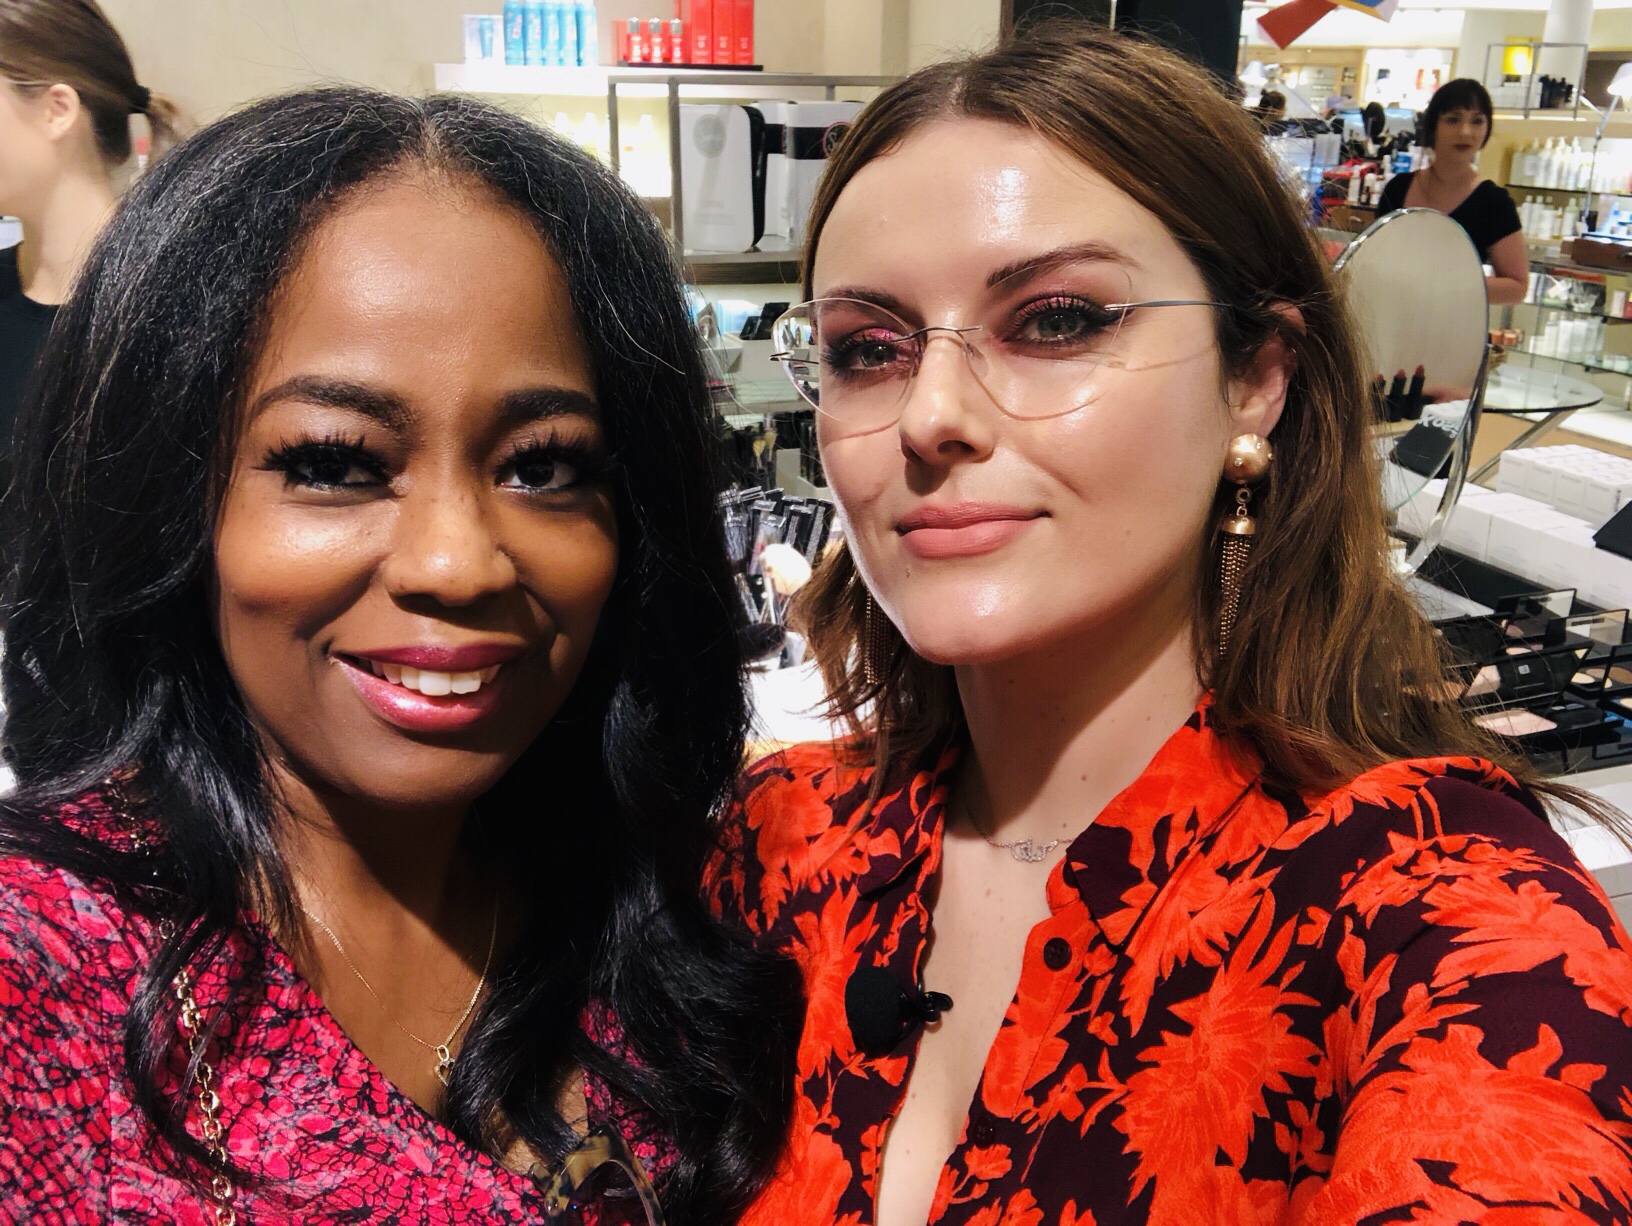 Beauty Trend Event With Makeup Artist Katie Jane Hughes At Neiman Marcus